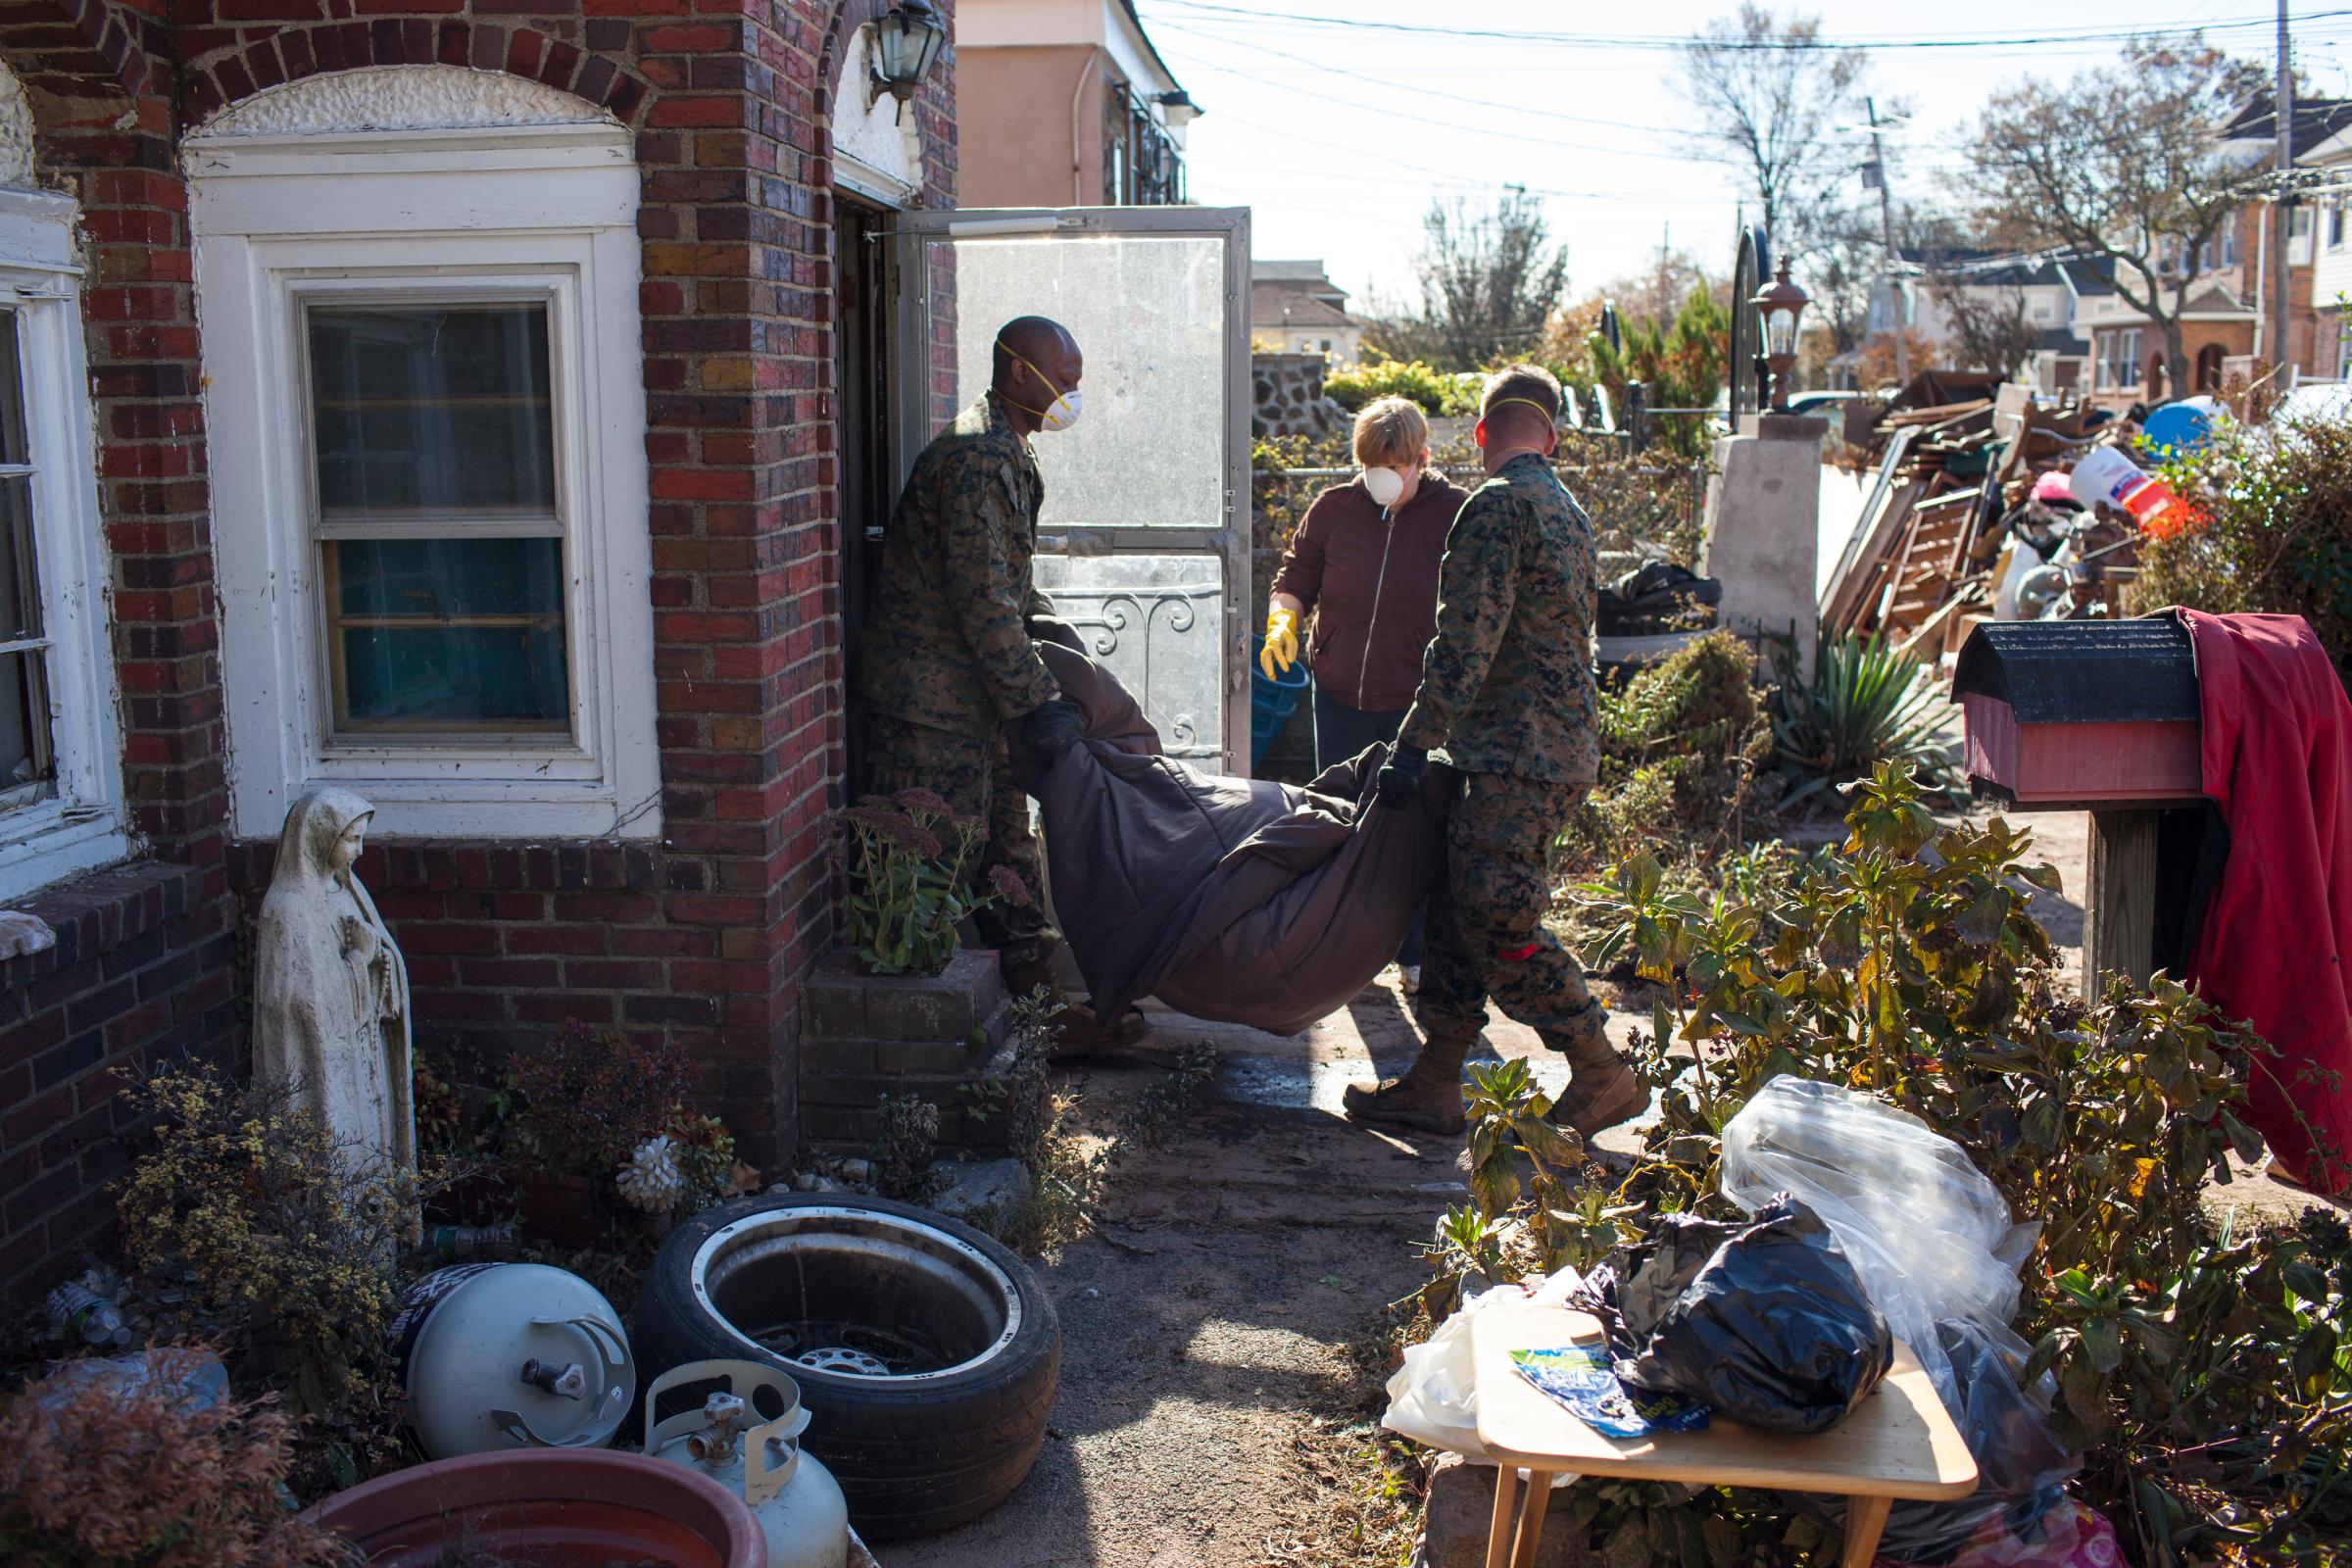 Image: Nov. 6, 2012. U.S. Marines and U.S. Navy seamen offer assistance to local residents removing damaged household items caused by Superstorm Sandy in the New Dorp Beach neighborhood in the Staten Island borough of New York.